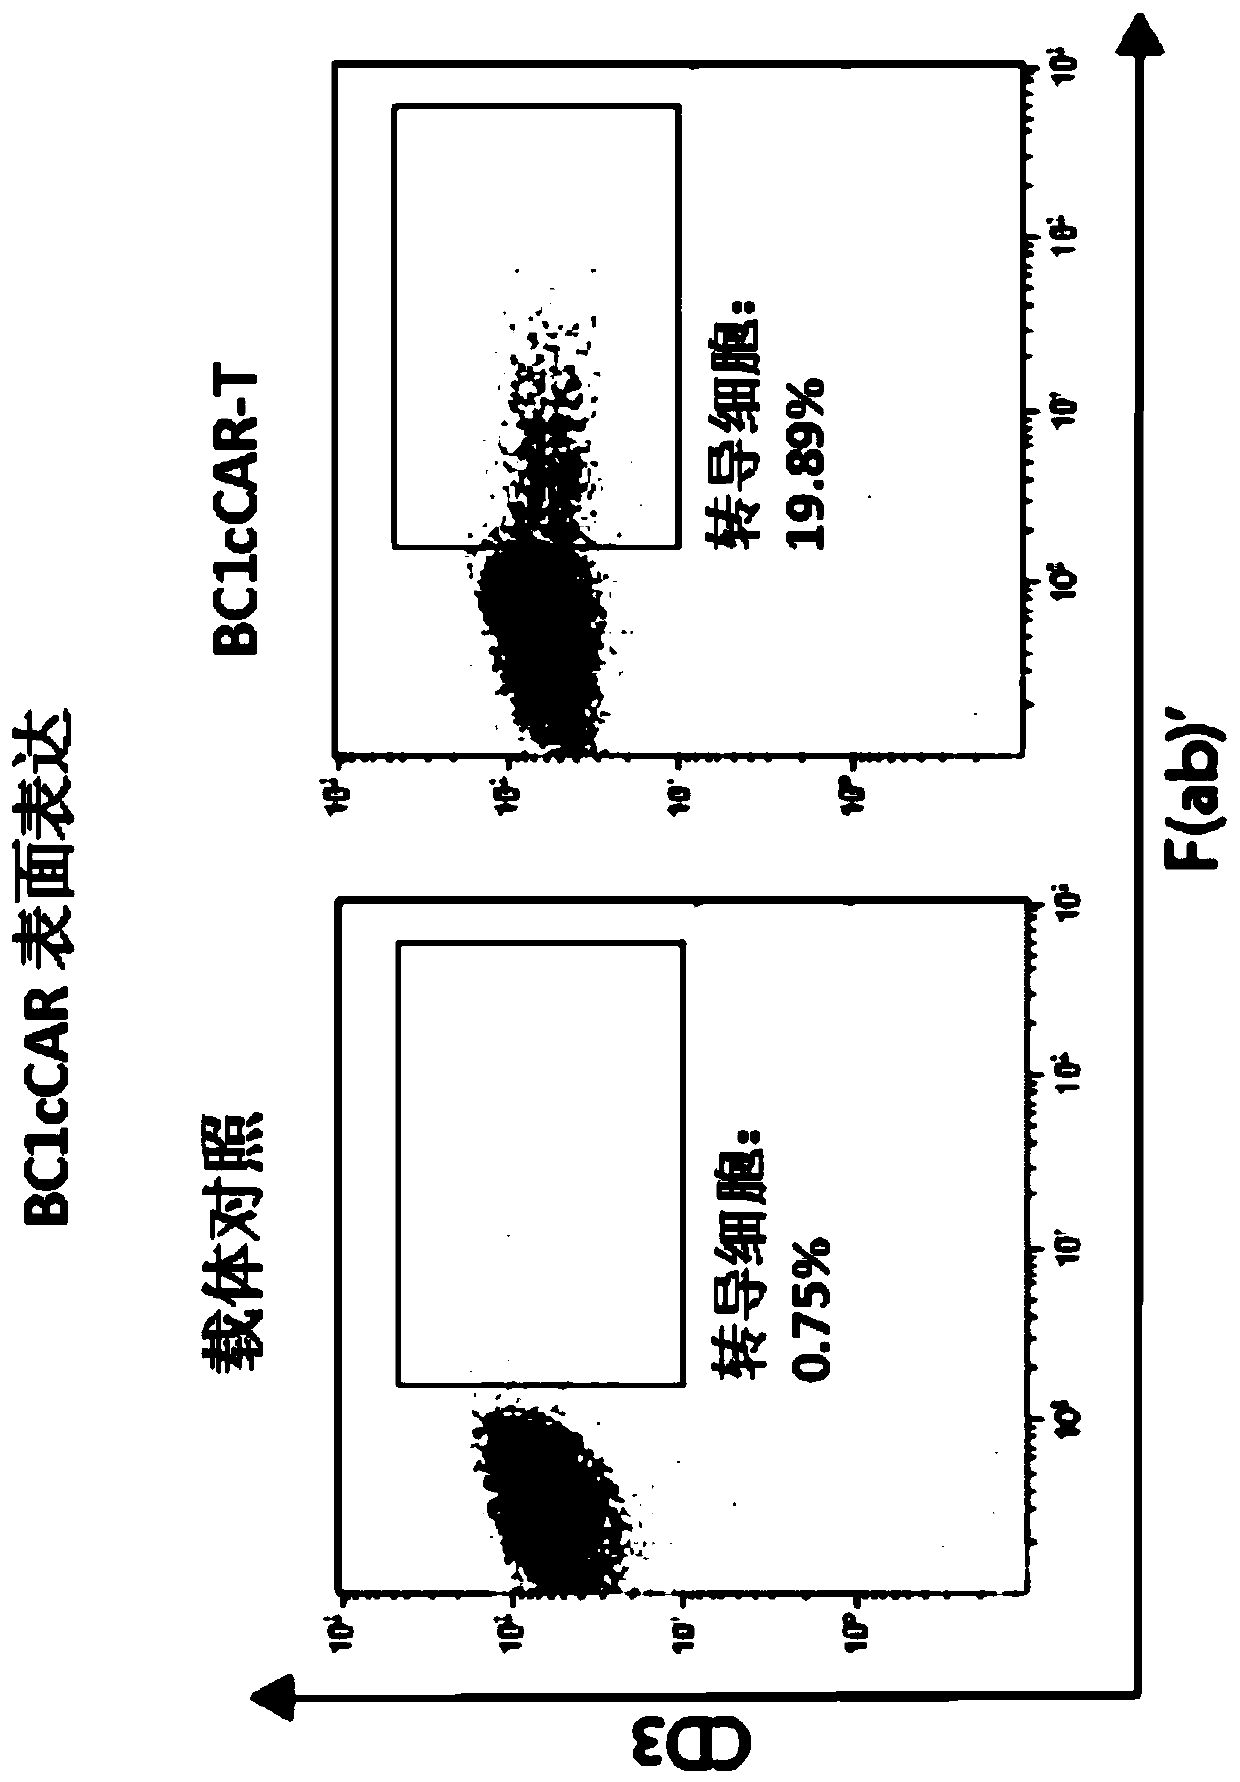 Compound chimeric antigen receptor (cCAR) targeting multiple antigens, compositions and usage method thereof